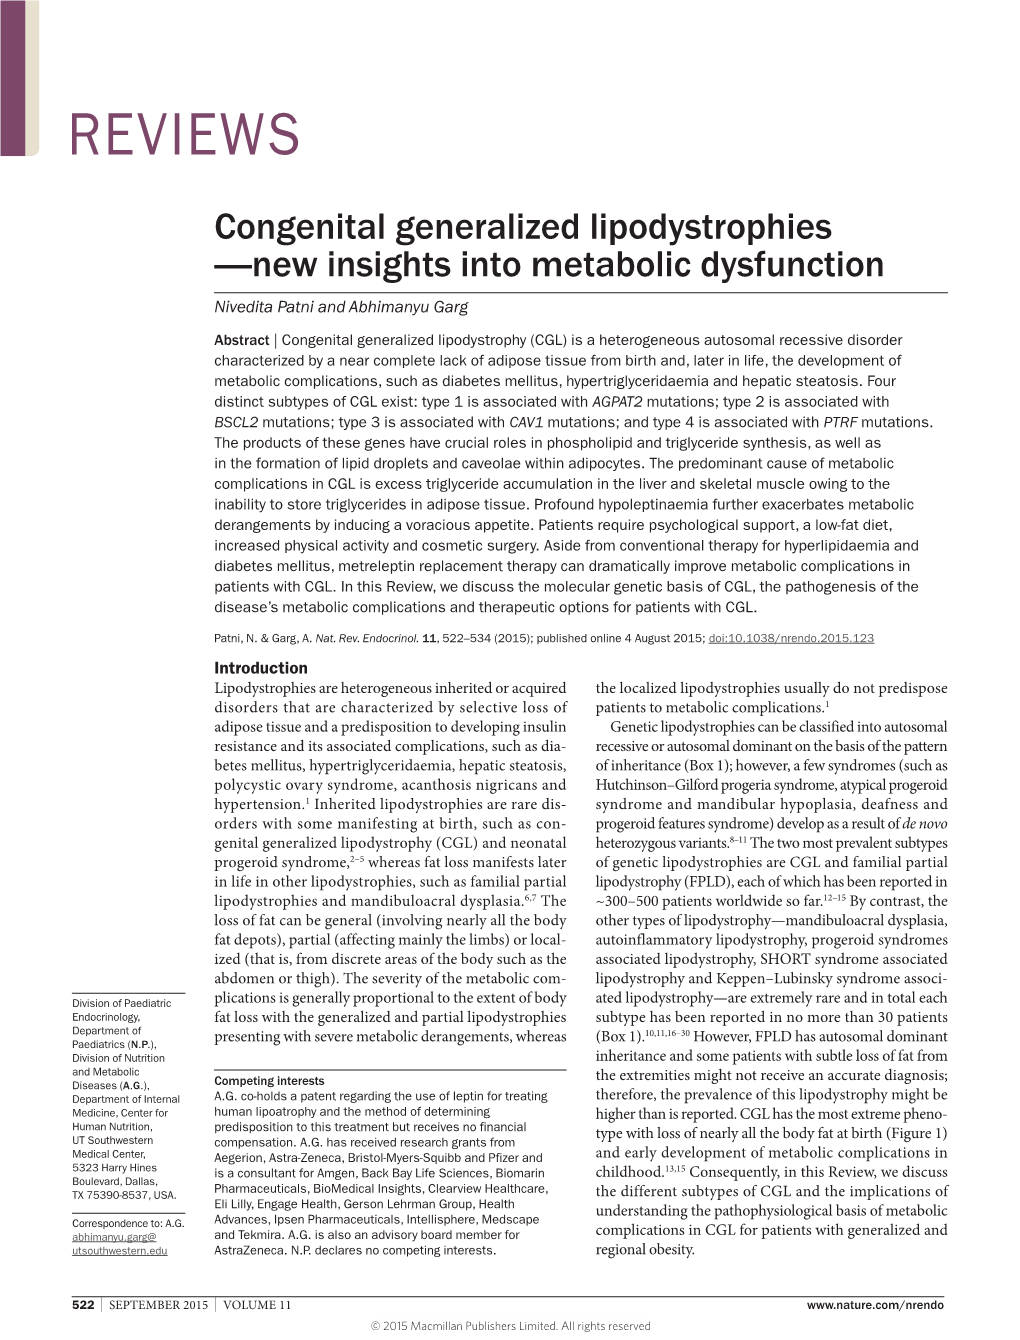 Congenital Generalized Lipodystrophies—New Insights Into